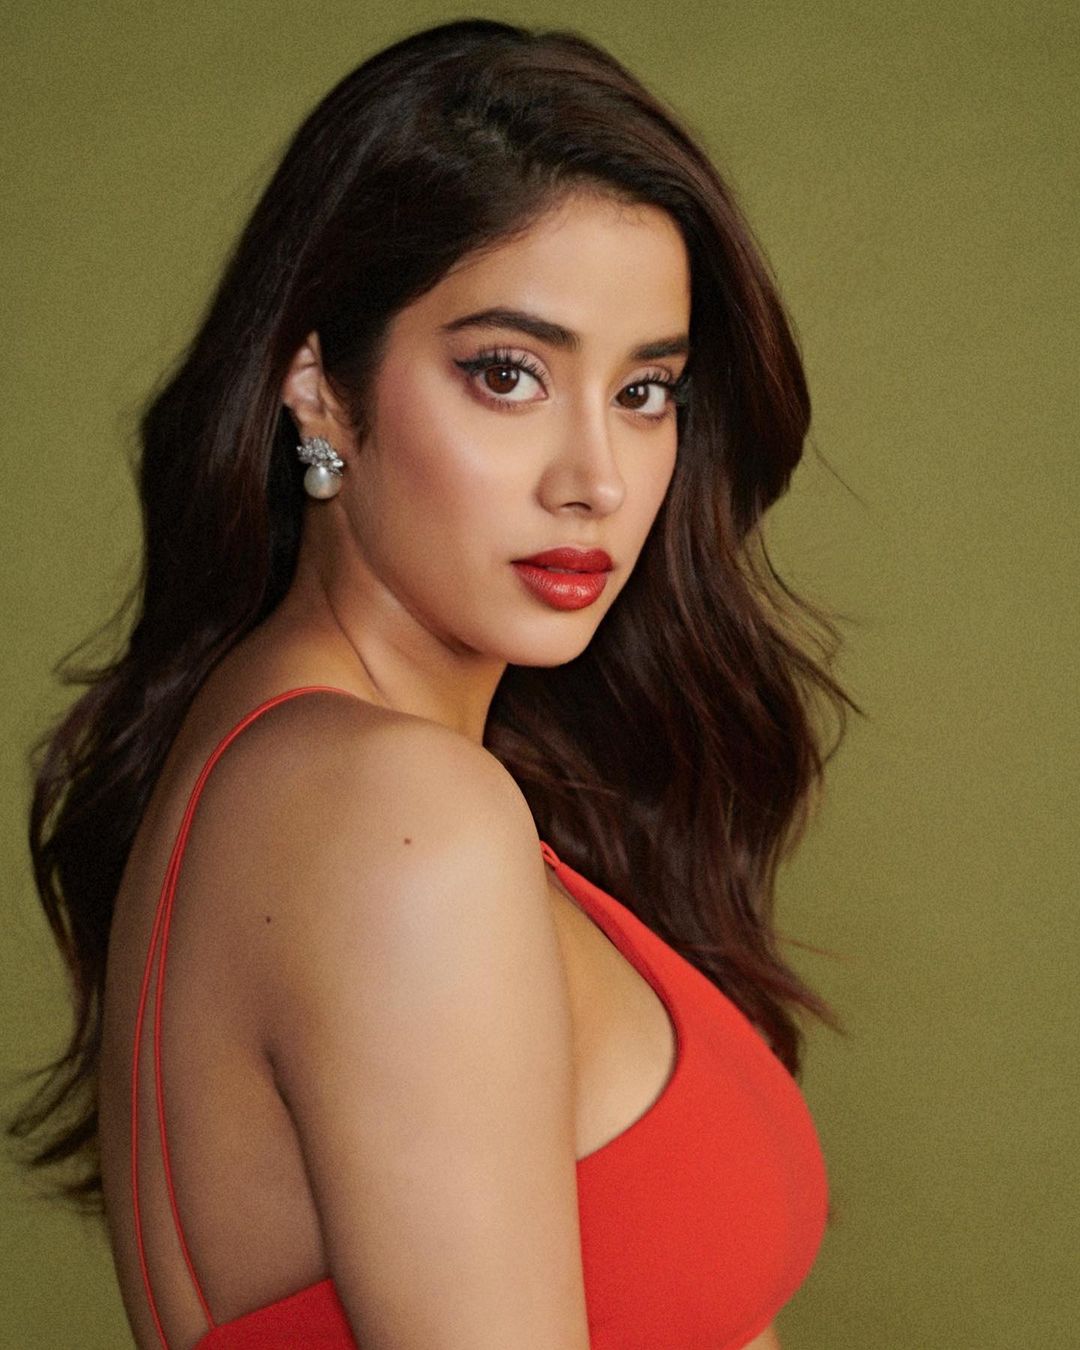 janhvi kapoor hot photos showing structure and shape getting viral